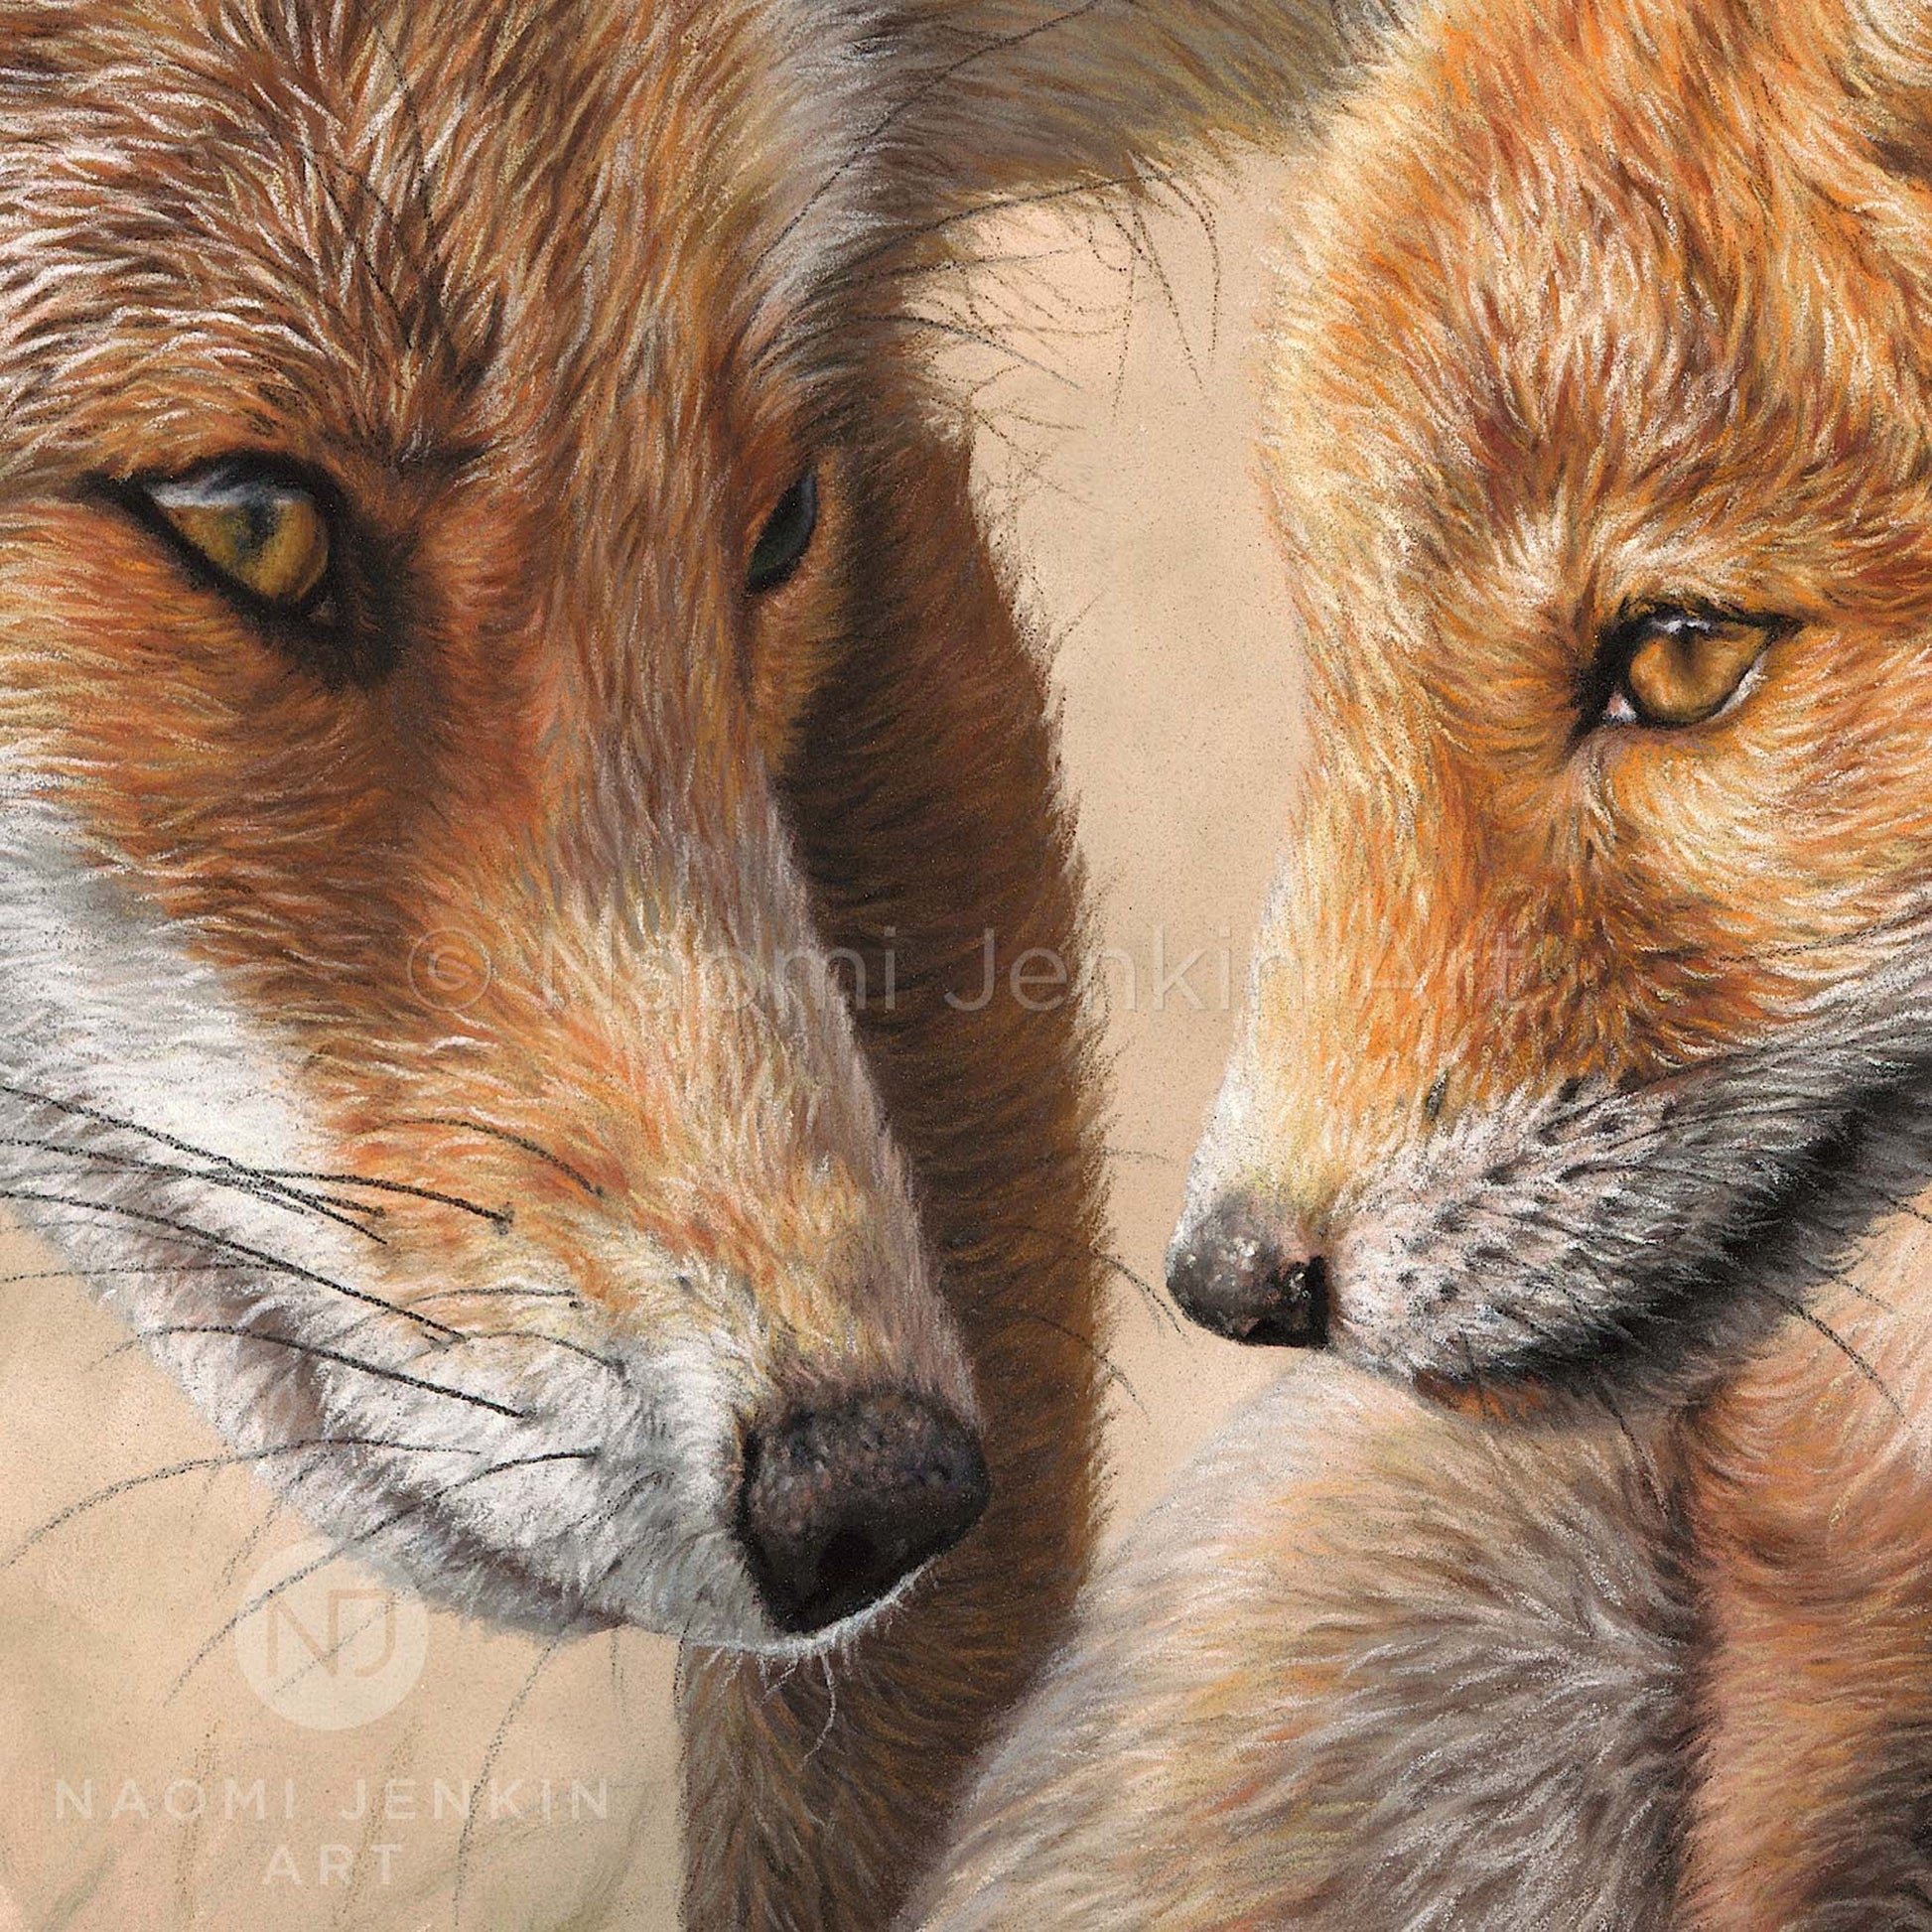 Close up of a wildlife art drawing of red foxes by Naomi Jenkin Art. 